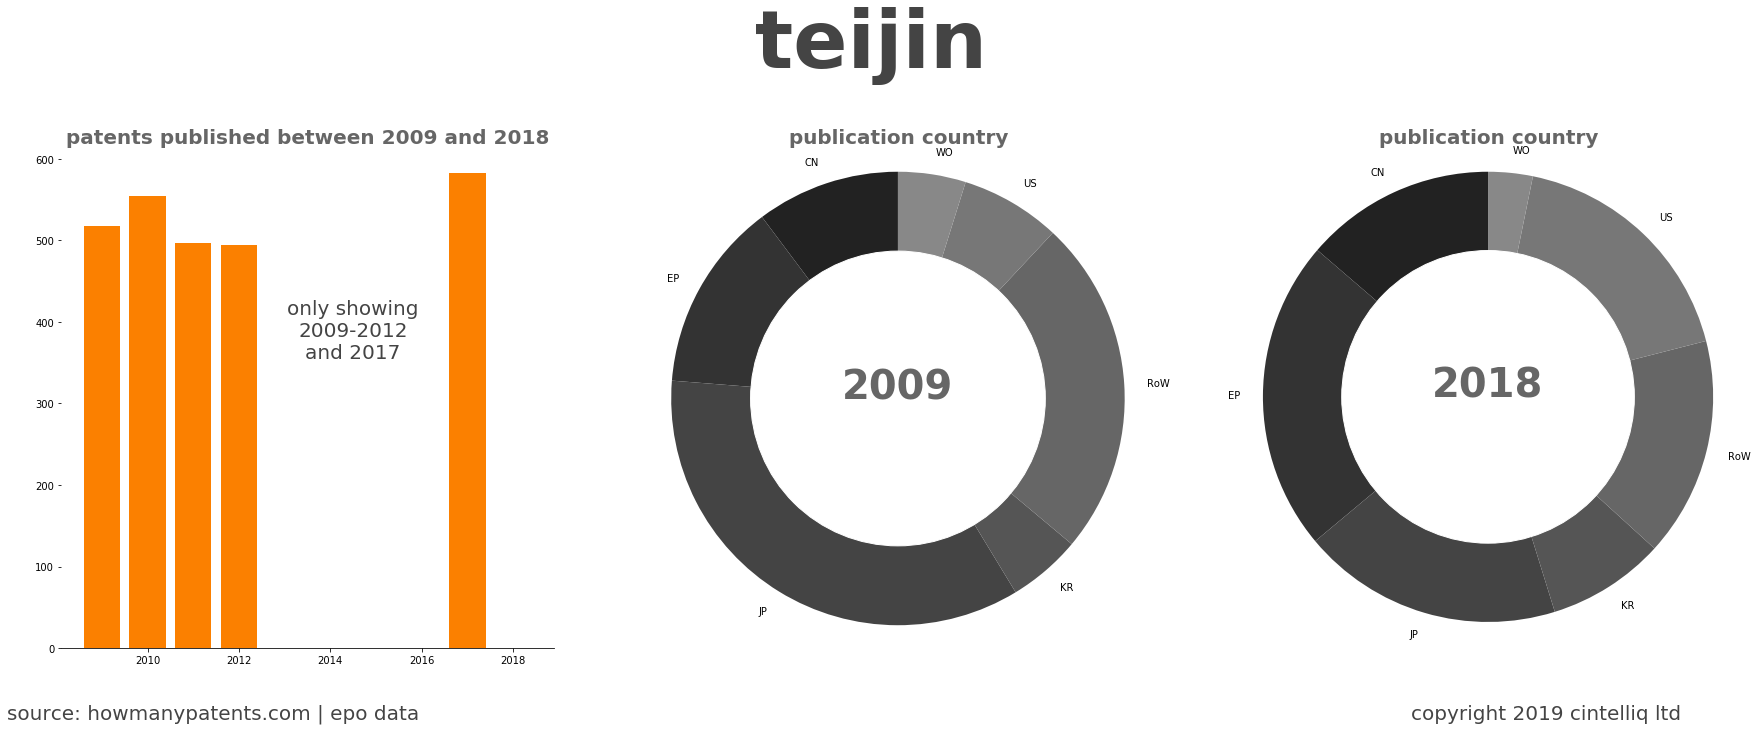 summary of patents for Teijin